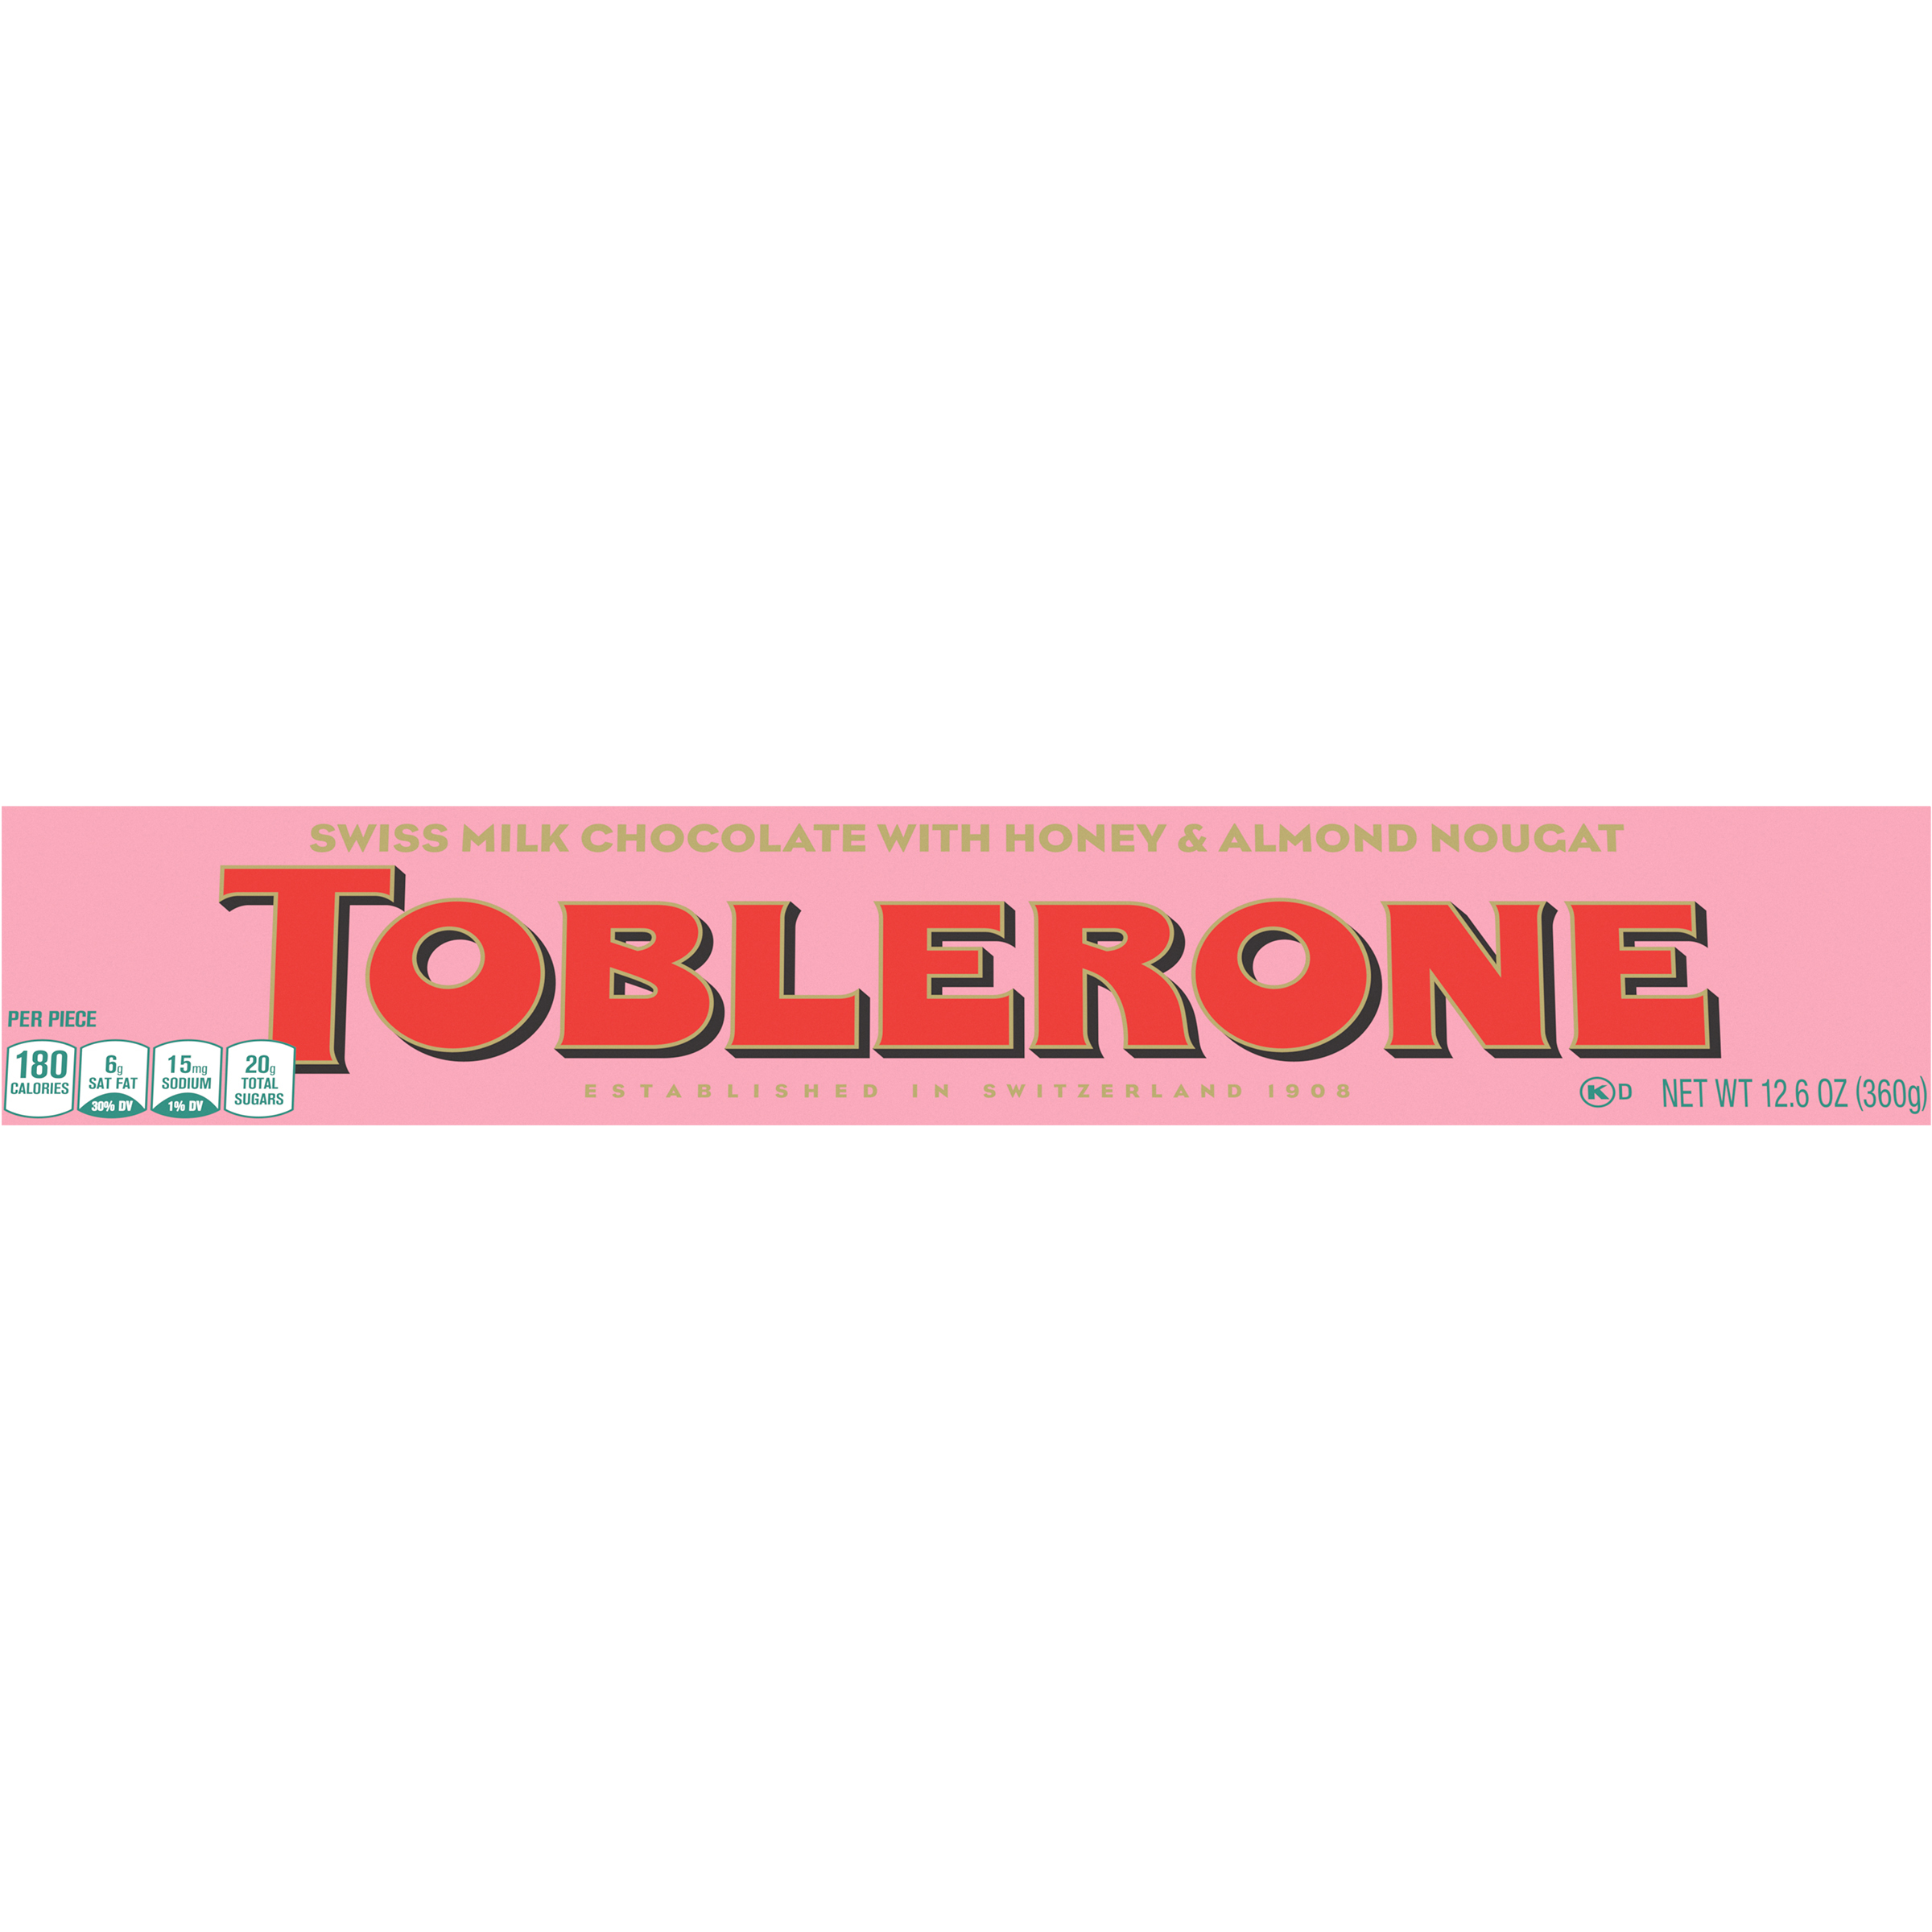 Toblerone Swiss Milk Chocolate Candy Bar with Honey and Almond Nougat, Valentines Chocolate, 12.6 oz-1